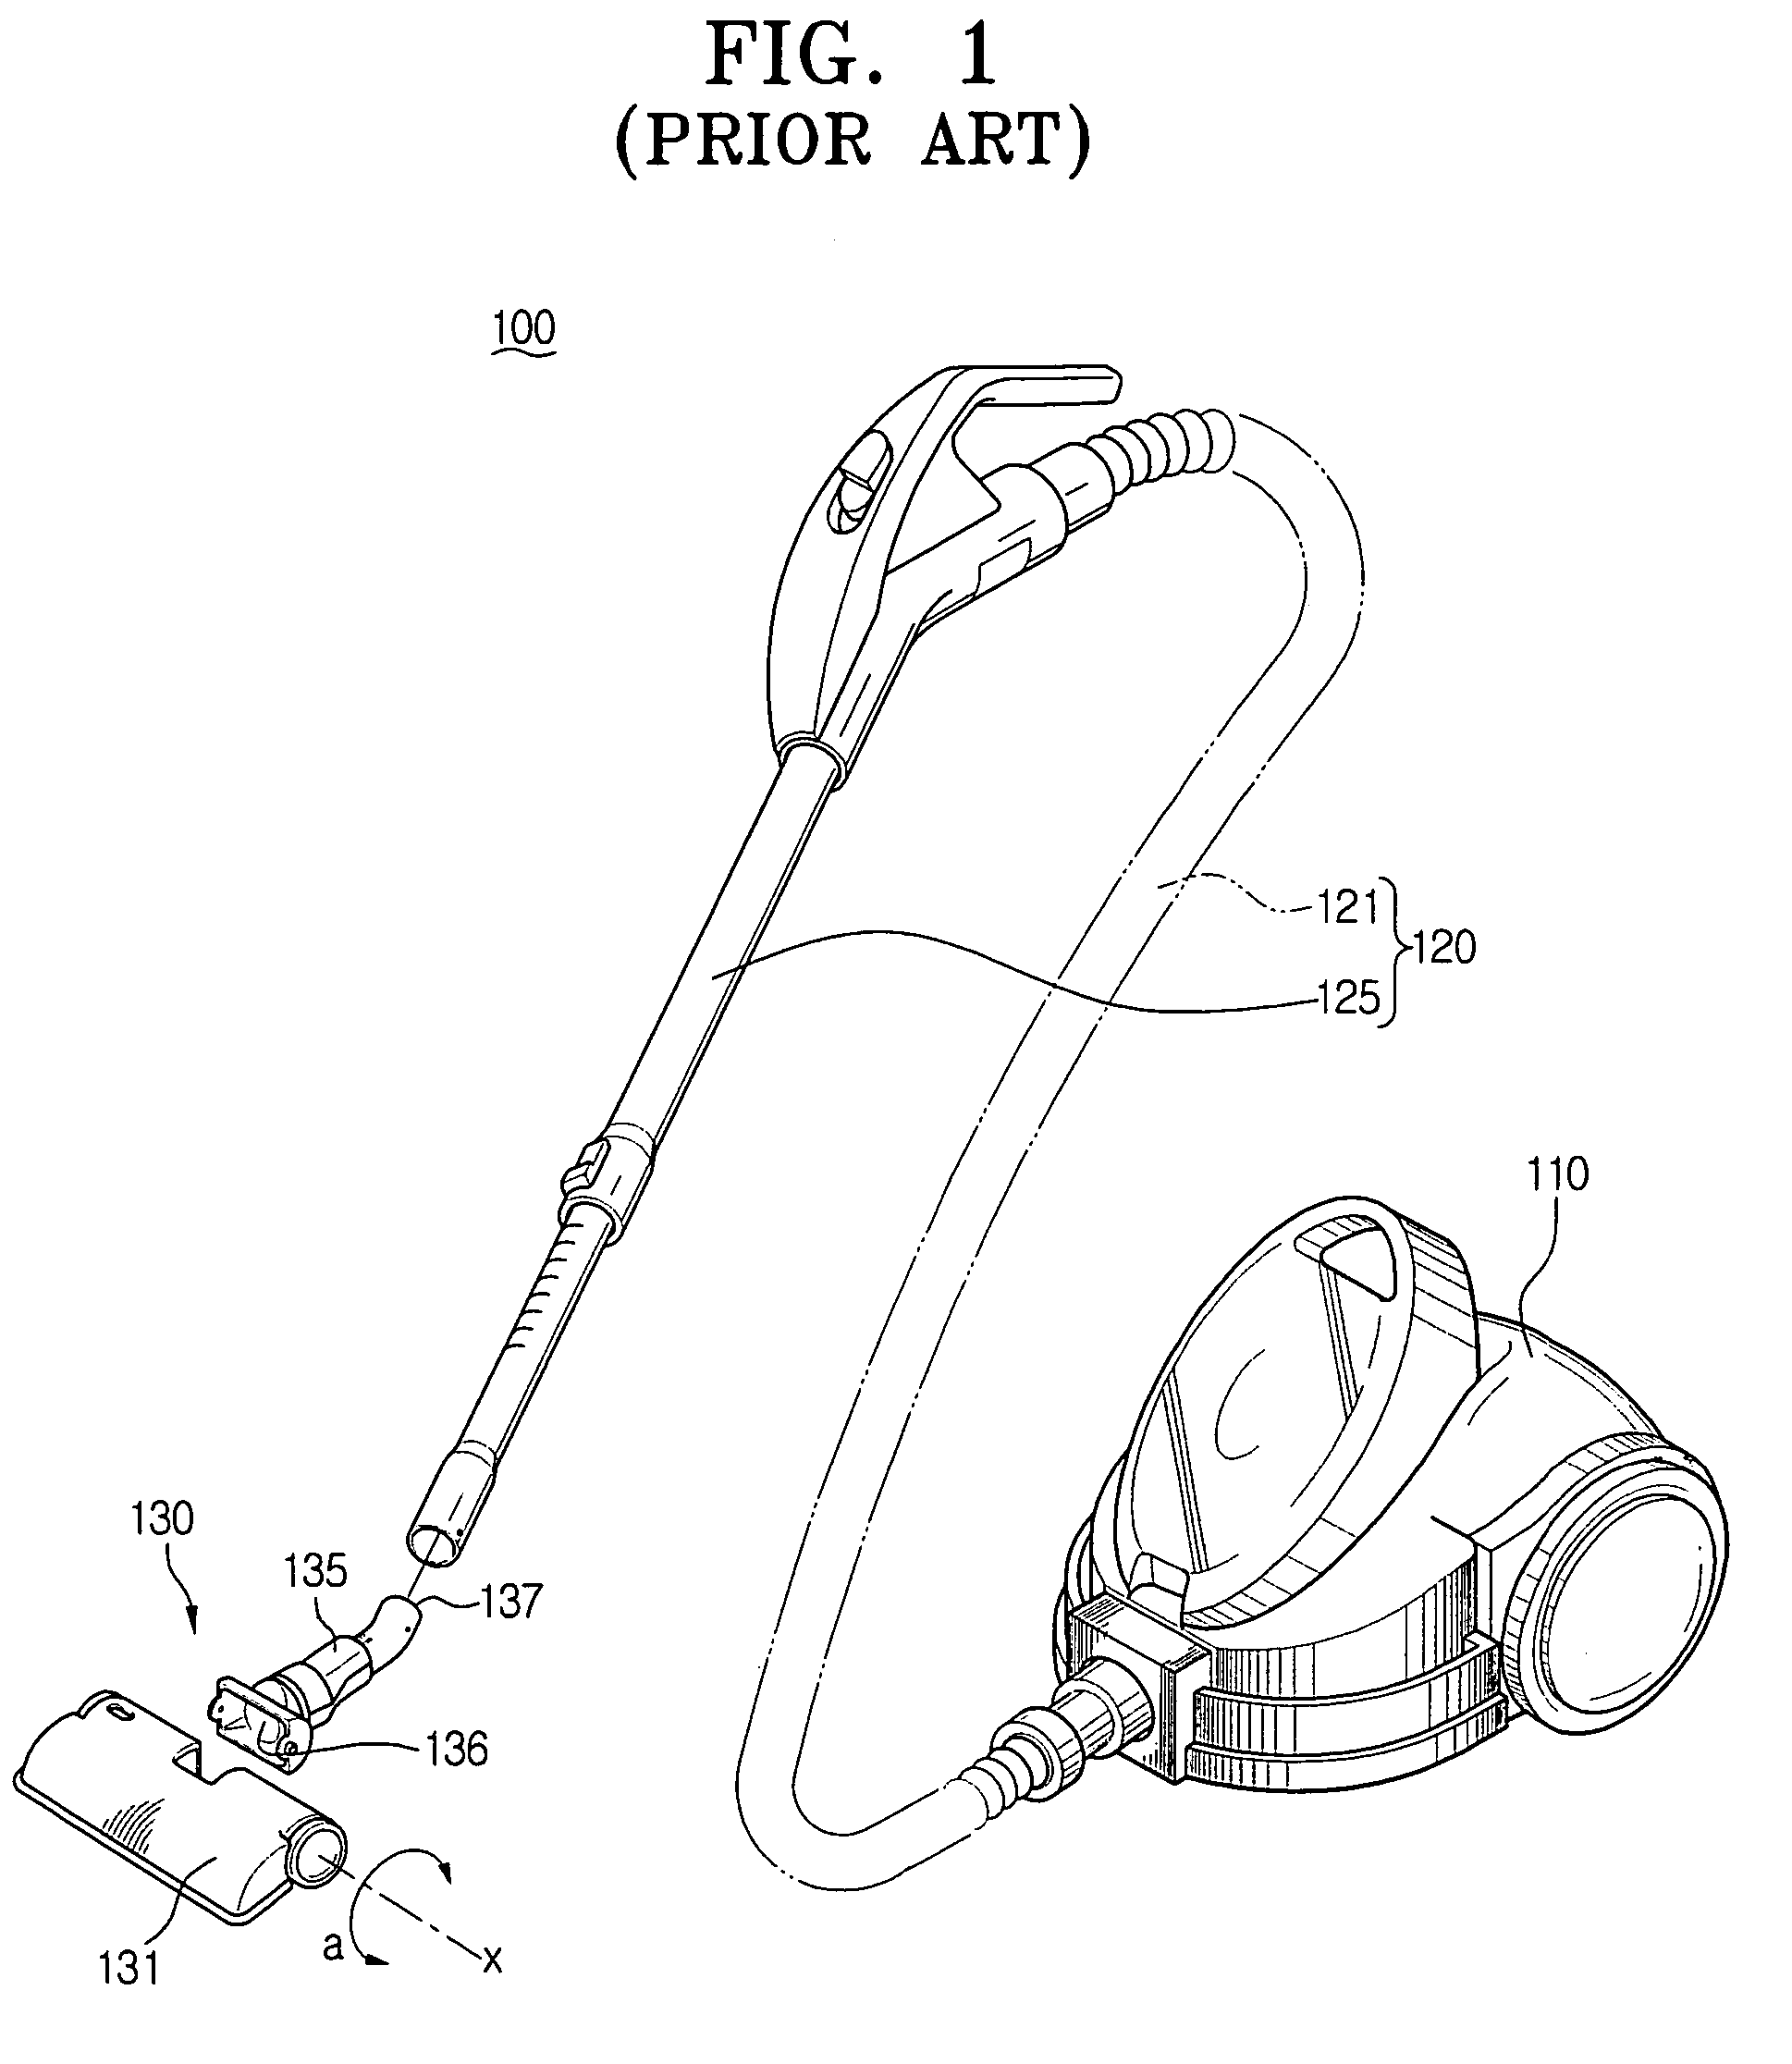 Vacuum cleaner with articulated suction port assembly